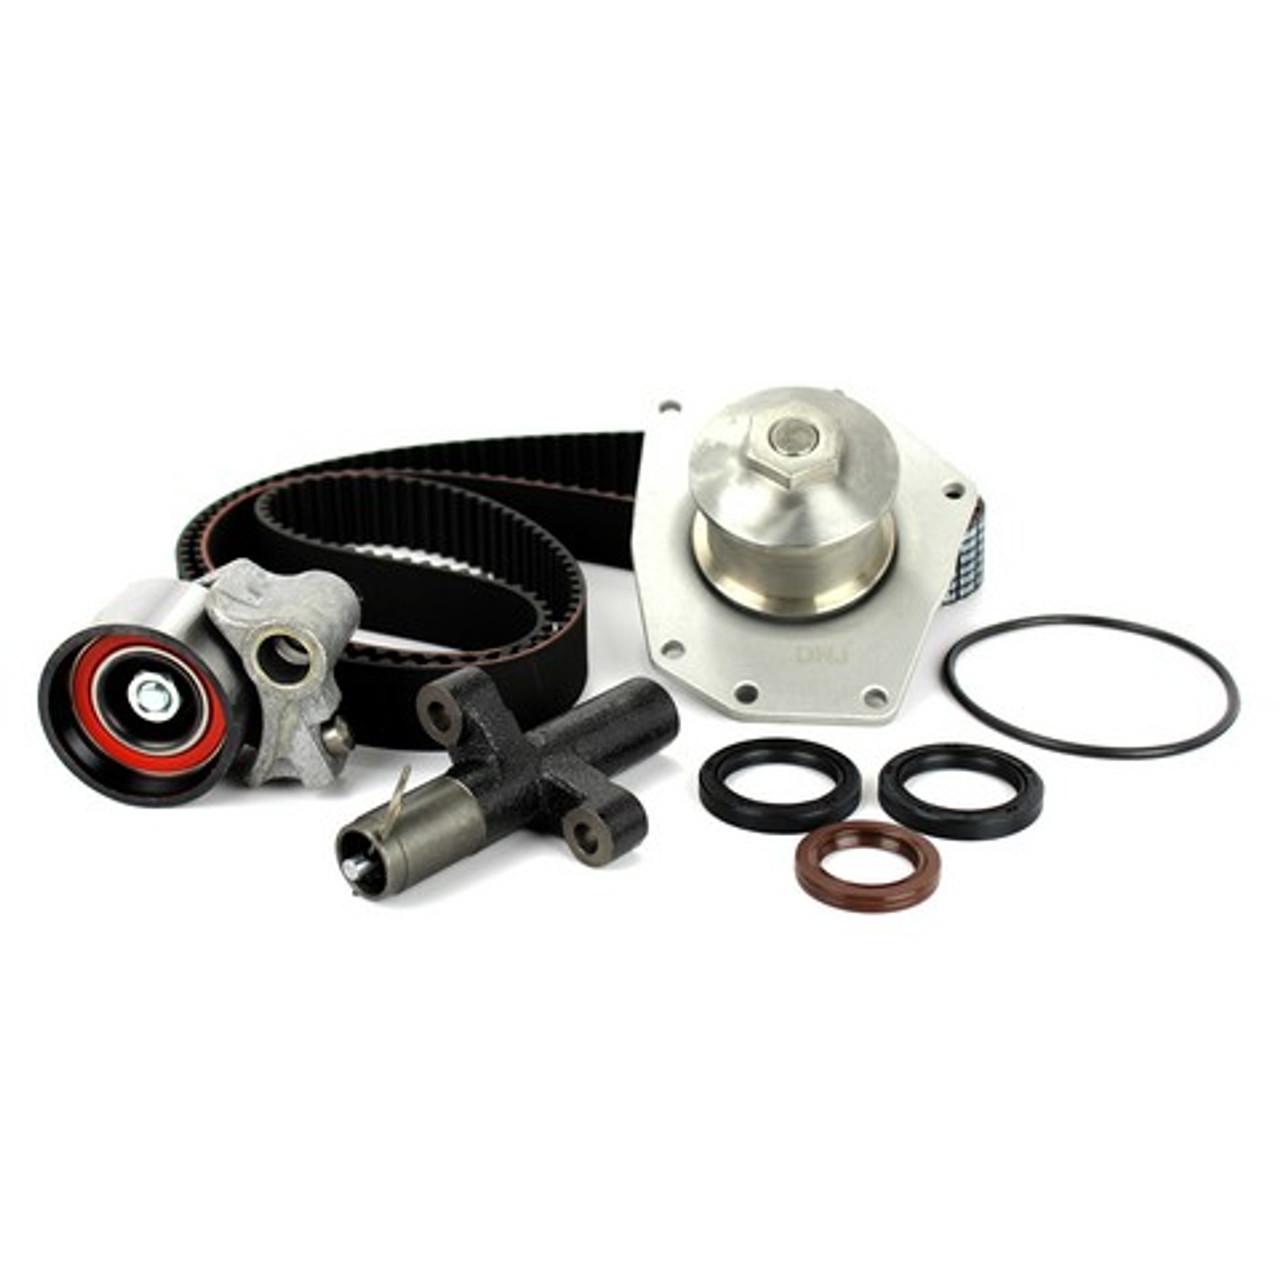 Timing Belt Kit with Water Pump 3.5L 2000 Chrysler LHS - TBK143WP.20